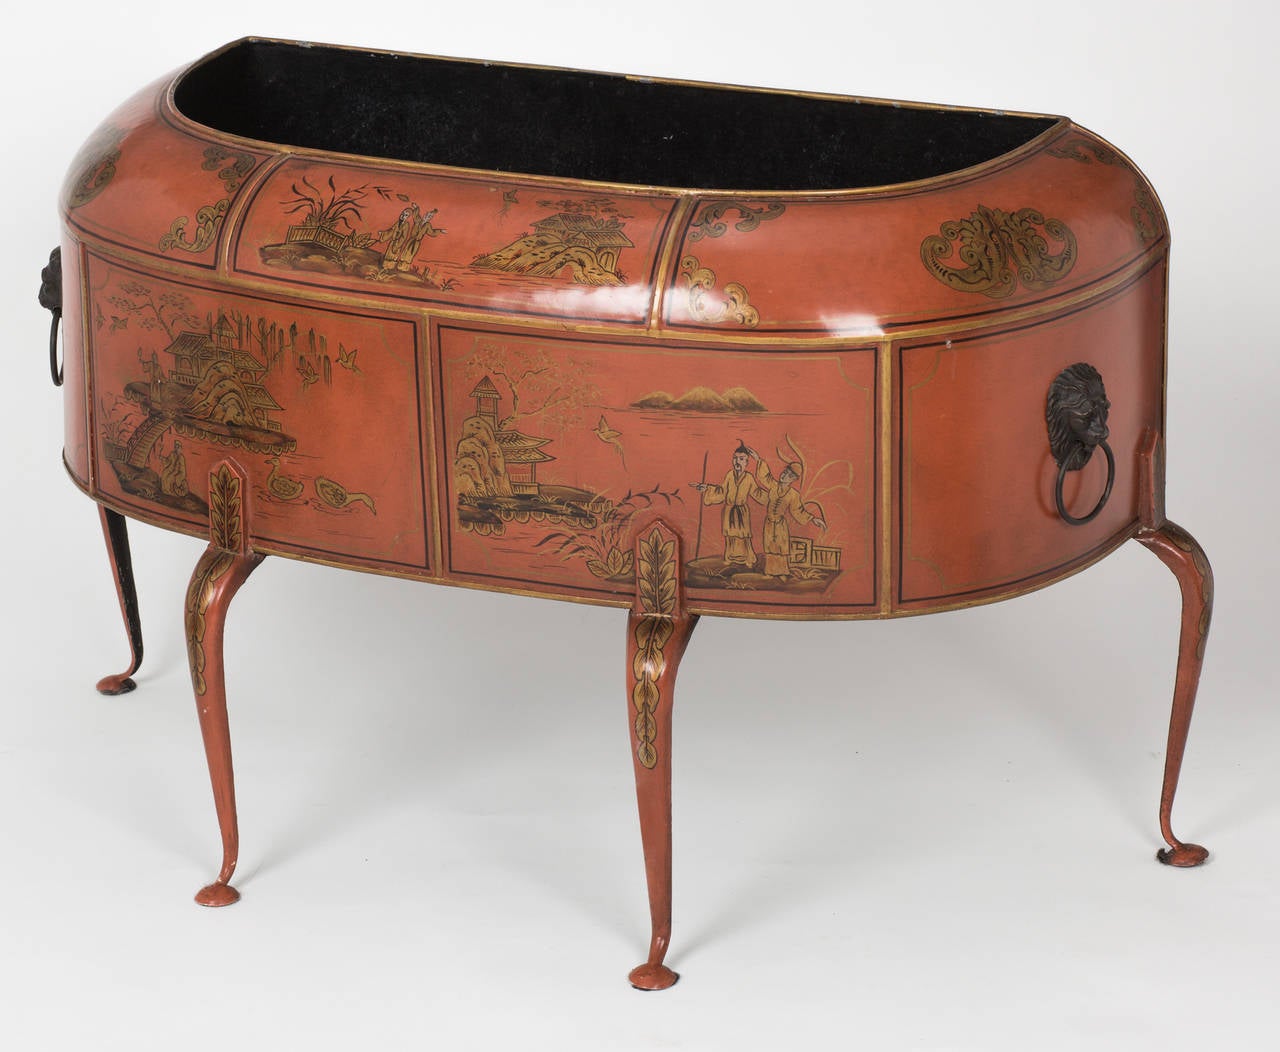 Charming tole, painted  metal  Chioiserie style planter.  Half round bombe  front is supported with four graceful legs. Lion face ring handles on each sides.